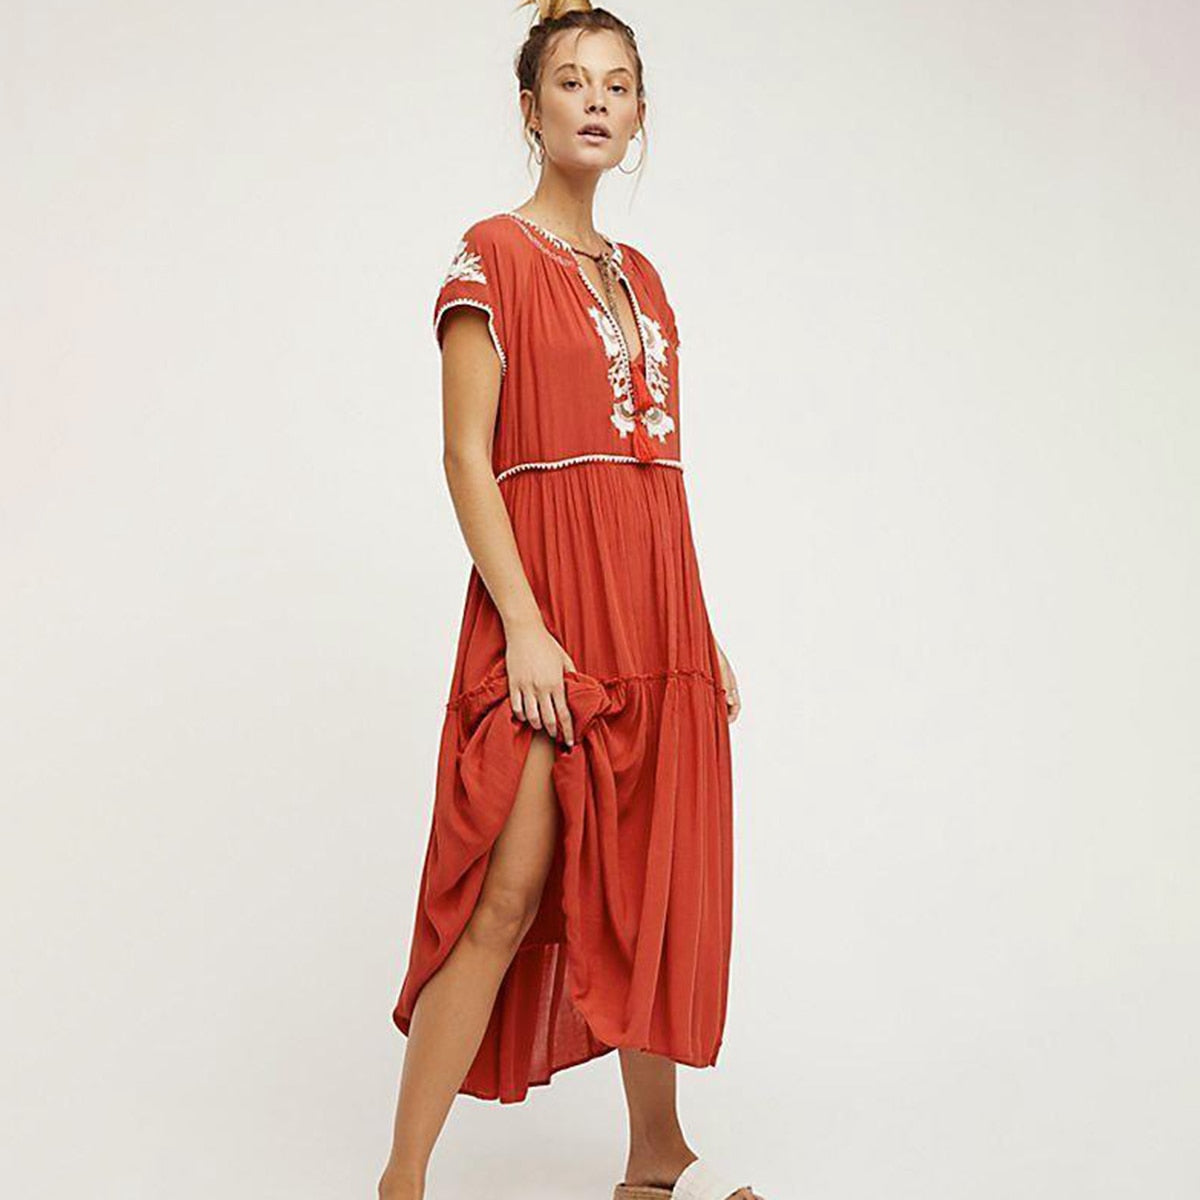 Daisy Fields Boho Maxi Dress Women Long Sleeve V neck Lace Up Sexy Dresses Ladies Red Embroidery Gypsy Hippie Long Dress 2020